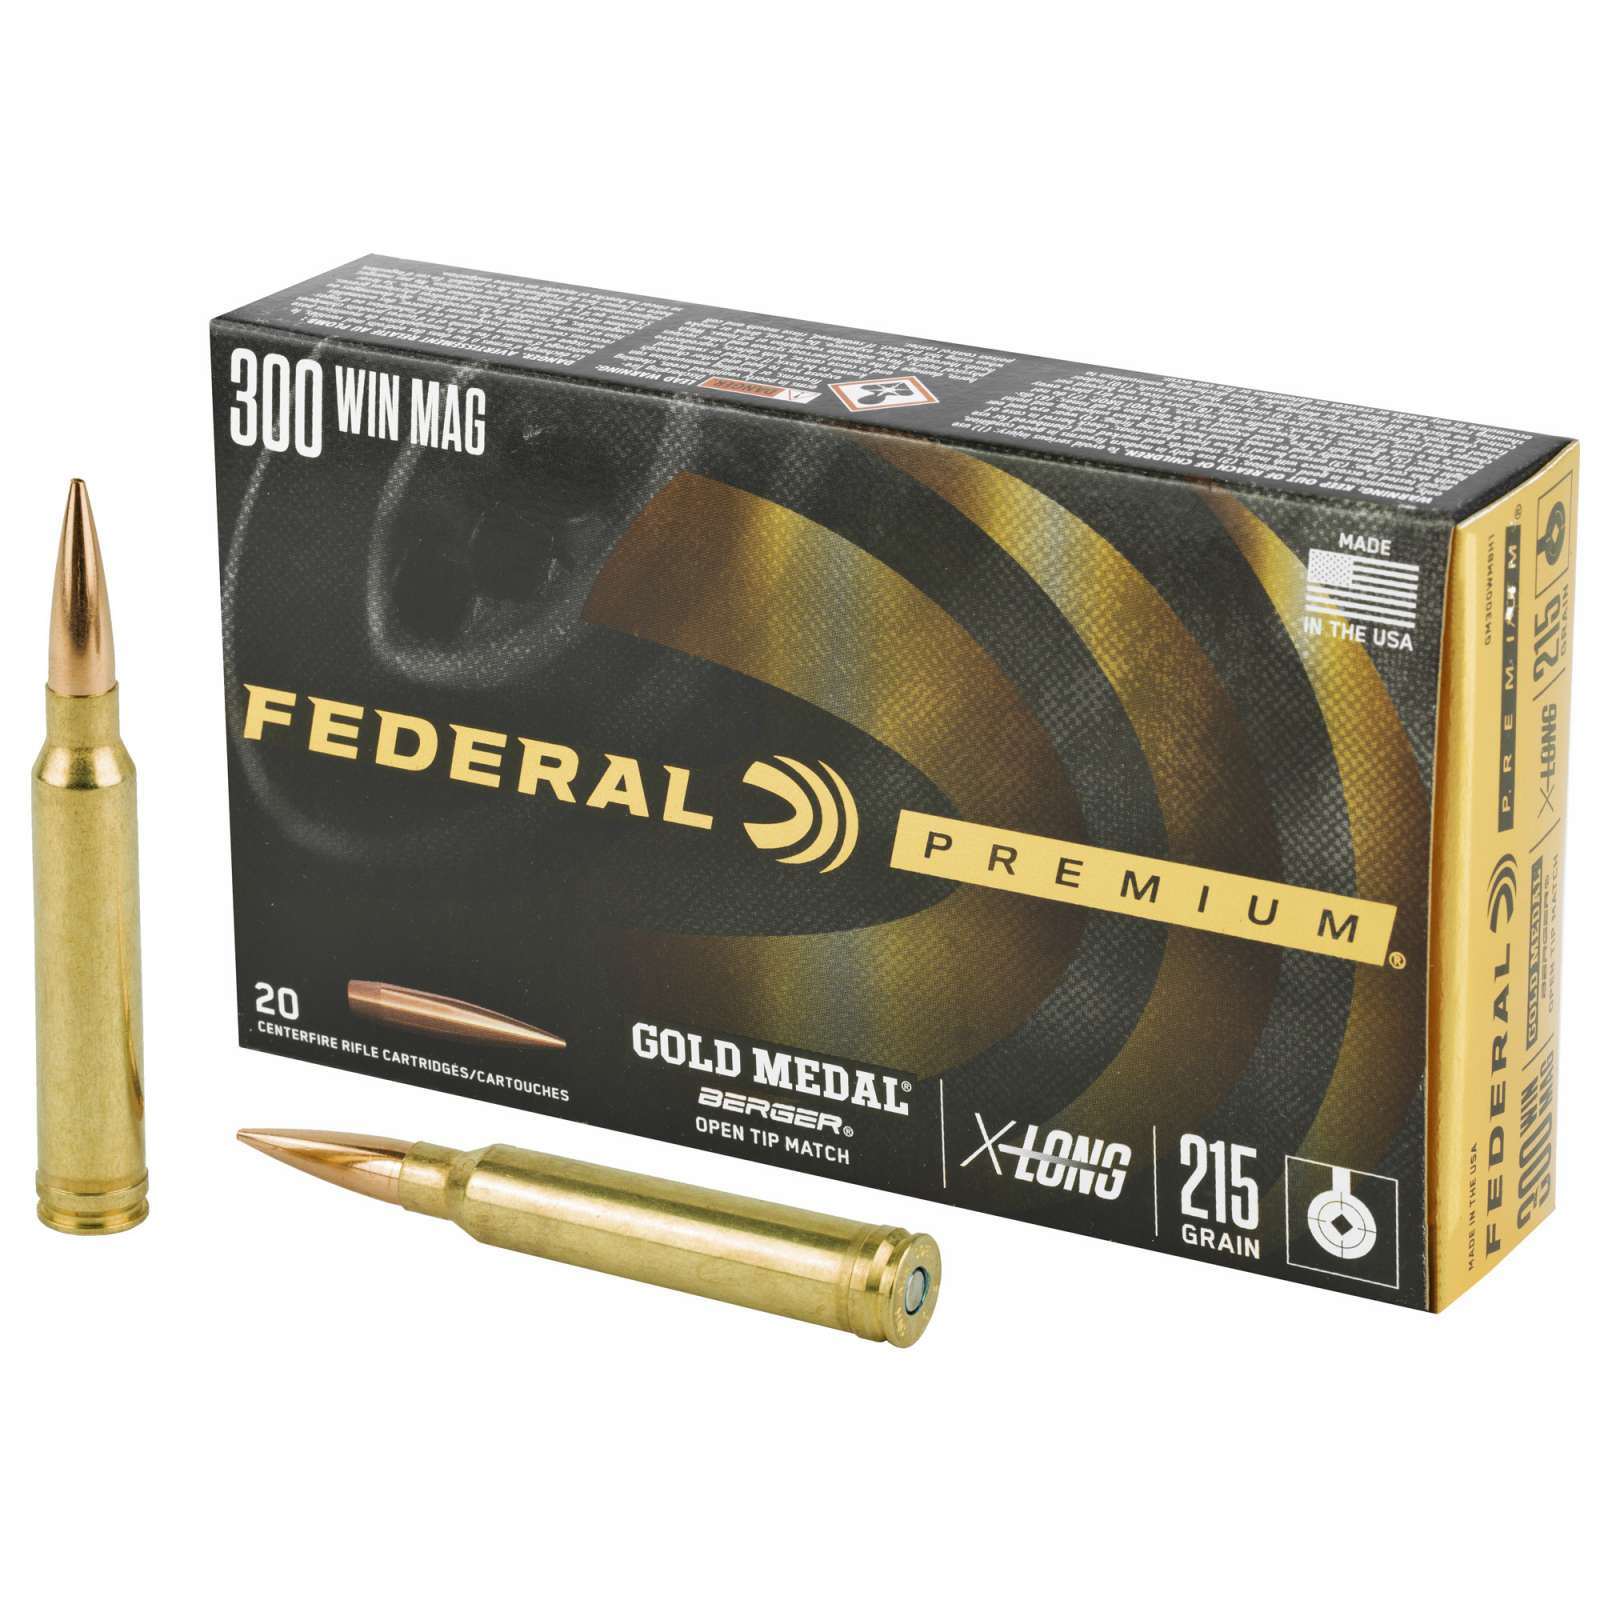 Federal Gold Medal 300 Win Mag Ammo 215 Grain Berger Hybrid Open-img-1